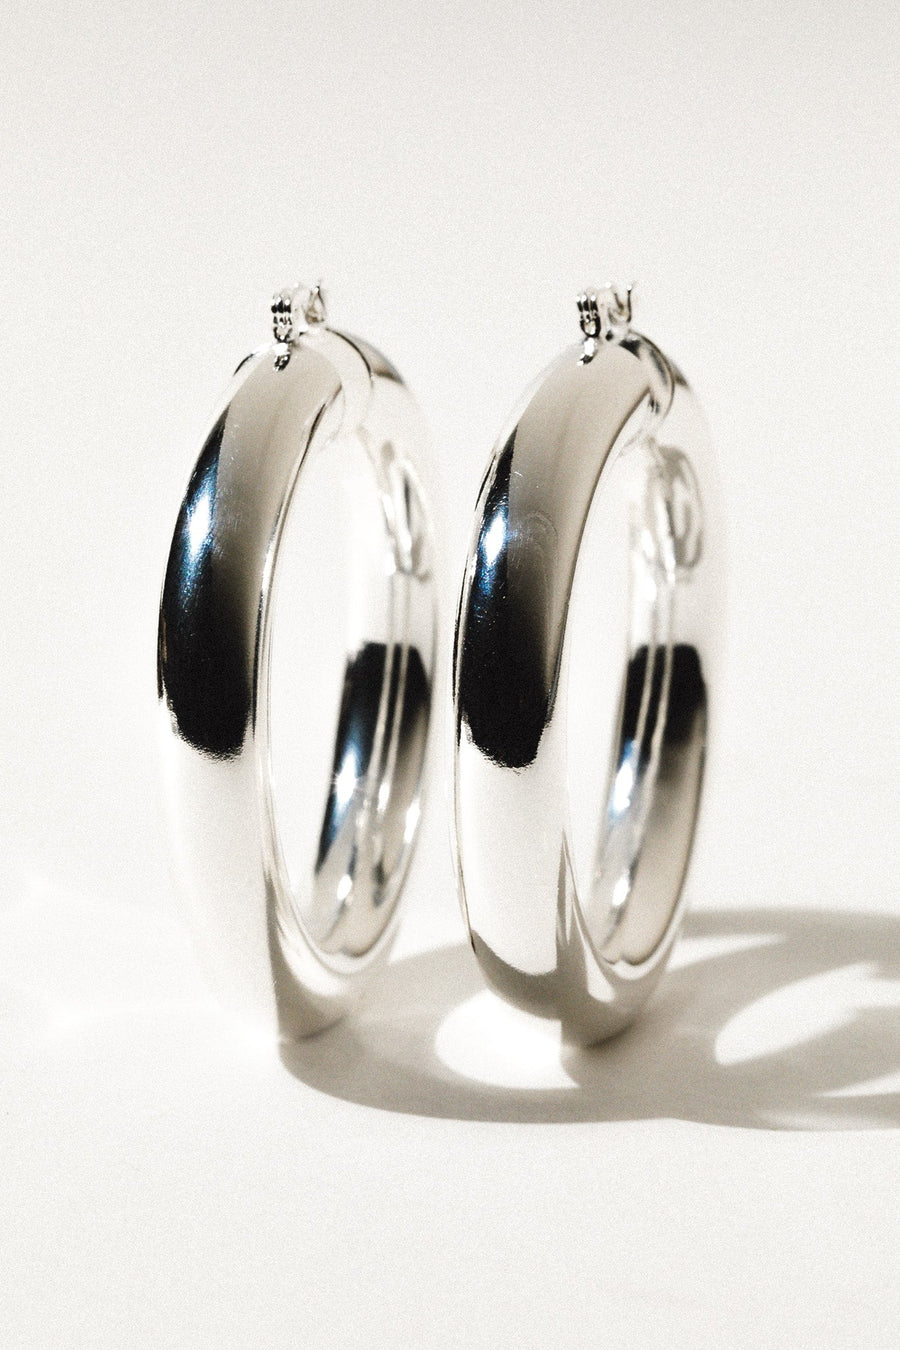 Dona Italia Jewelry Silver / LARGE Large Aubree Tube Hoops.:.Silver